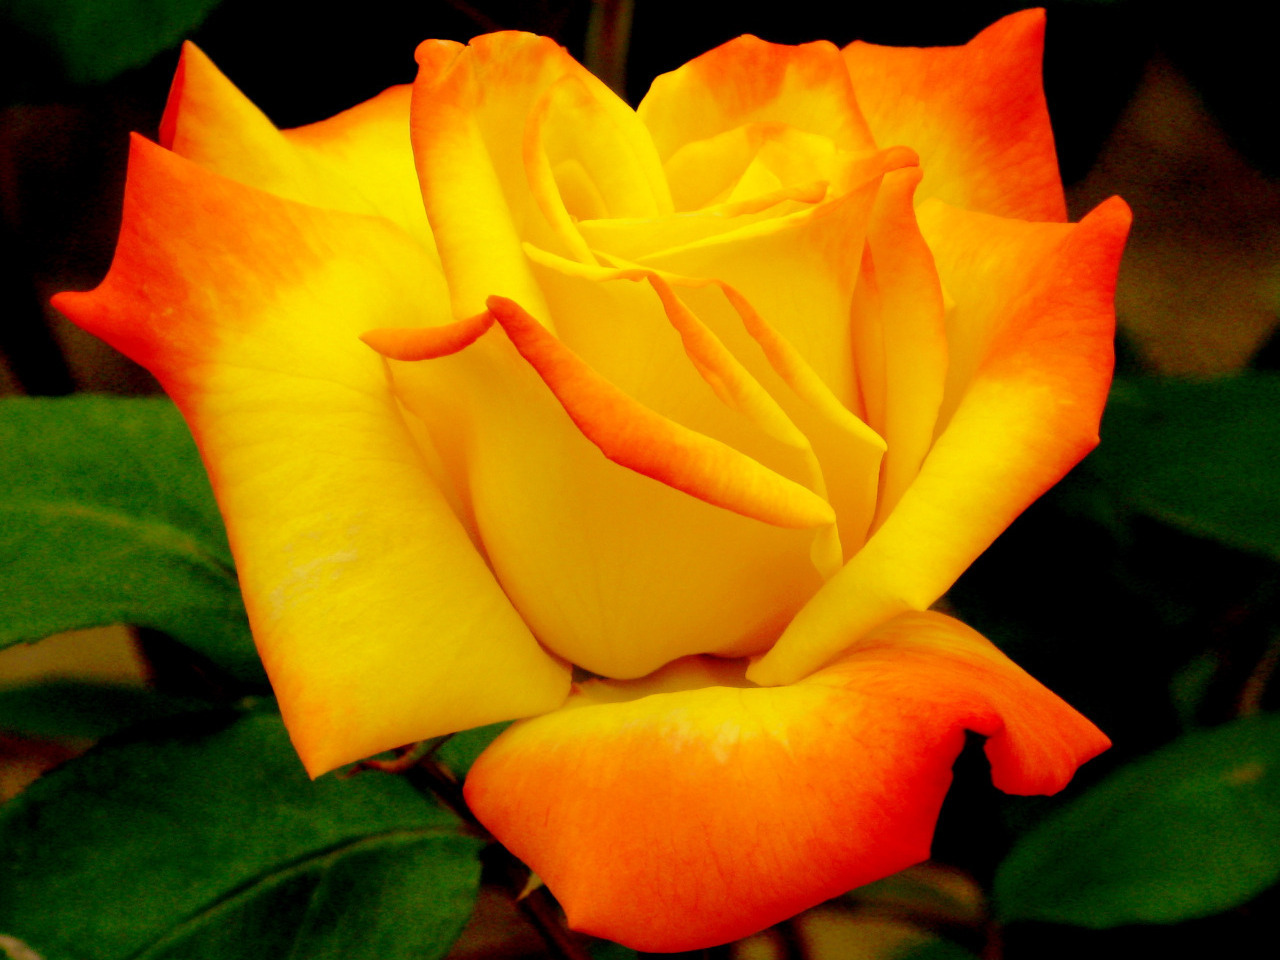 Roses images Beautiful Color wallpaper photos 18577529 1280x960